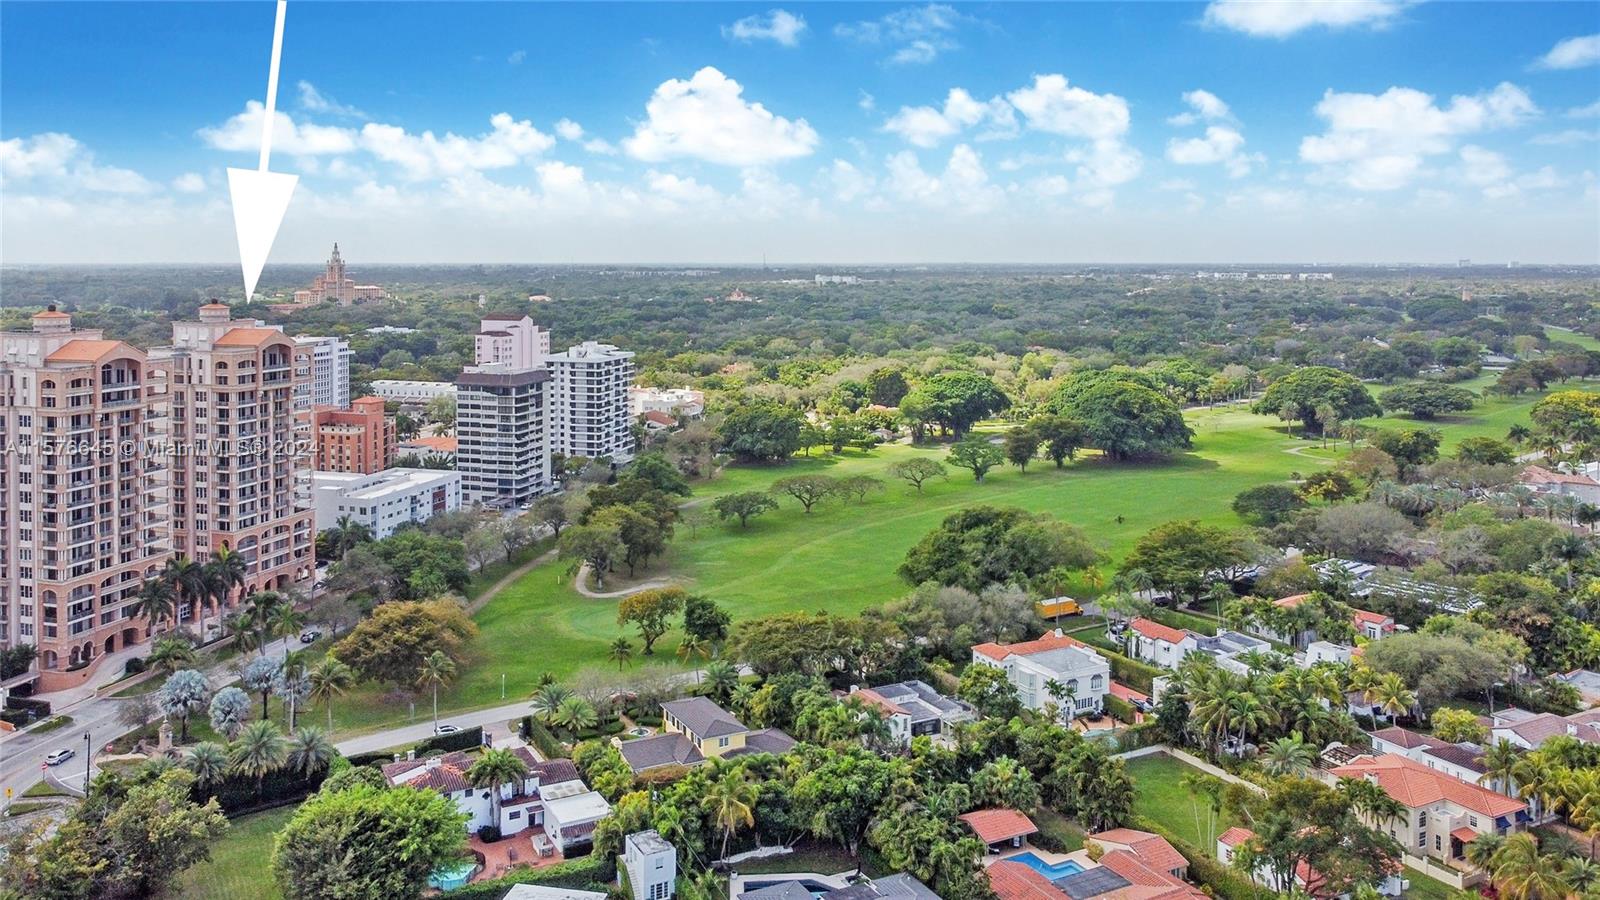 Your search for an exceptional residence ends here with this rarely available high-floor 04 line unit in the highly sought-after Gables on The Green. Prepare to be delighted by the luminous interiors that offer unobstructed vistas of the golf course, city skyline, and Coral Gables' famed tree canopy. This remarkable residence boasts a private elevator vestibule, tall ceilings, and finely crafted millwork. Floor-to-ceiling windows and doors, along with balconies on the north, west, and south, provide panoramic views while being enveloped in its understated elegance. Experience the joy of luxury living with this remarkable property. Gables on The Green is currently undergoing building-wide beautification -- surely increasing its value upon completion. Now available for private tours.